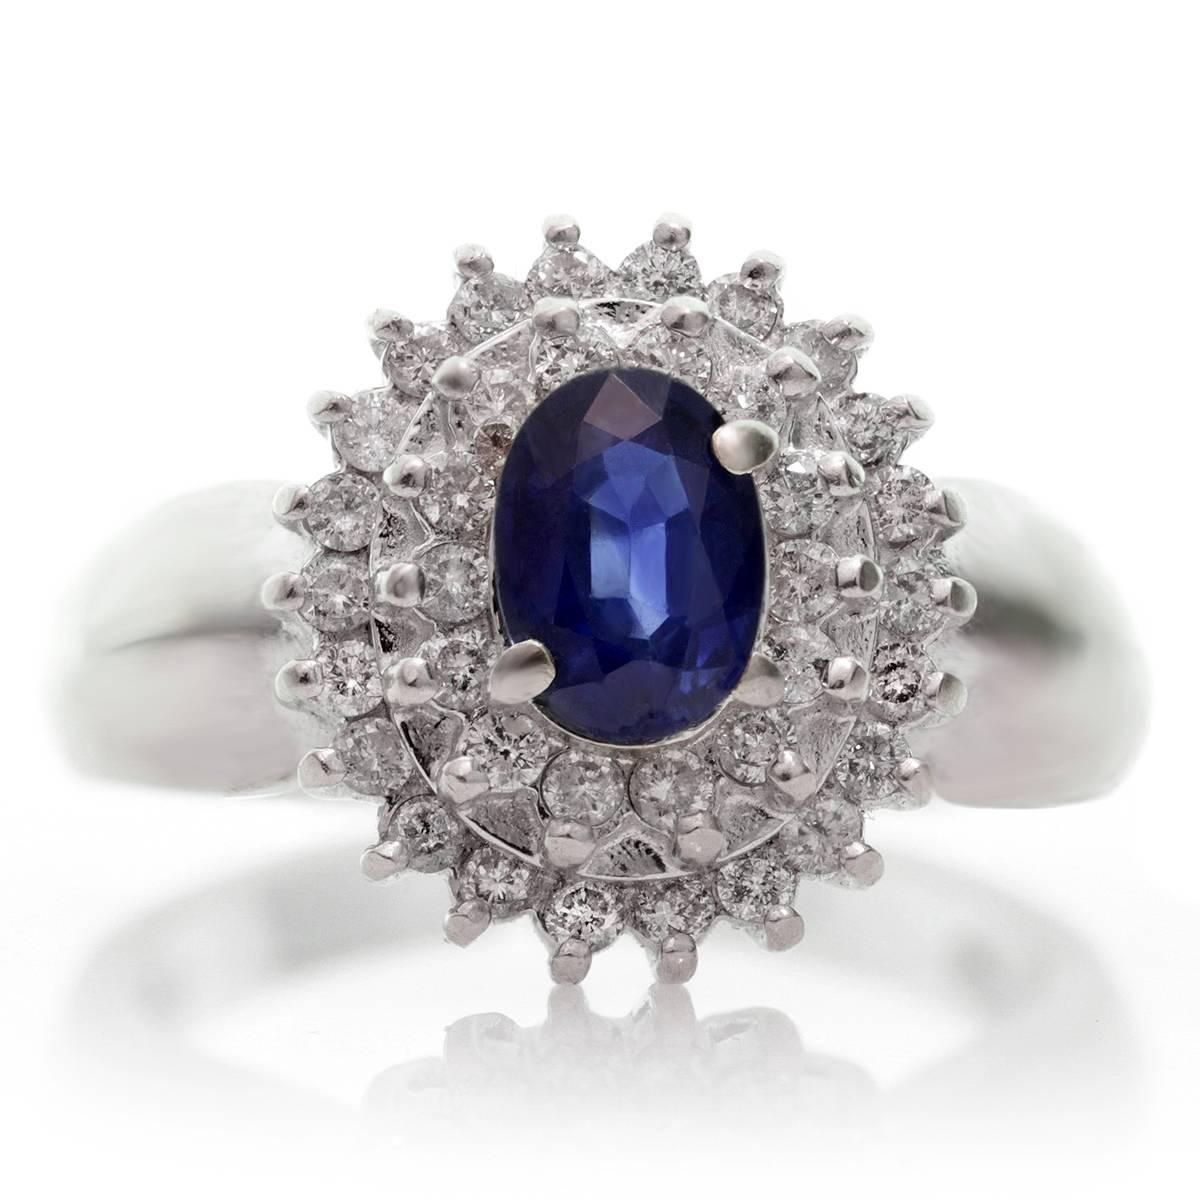 This majestic dome-shaped vintage ring is made in 14k white gold and features a vivid blue 5.0mm x 7.0mm faceted oval sapphire in the center 0.85ct., surrounded by an estimated 0.70 carats of sparkling diamonds. Circa 1980s. Measurements: 0.55